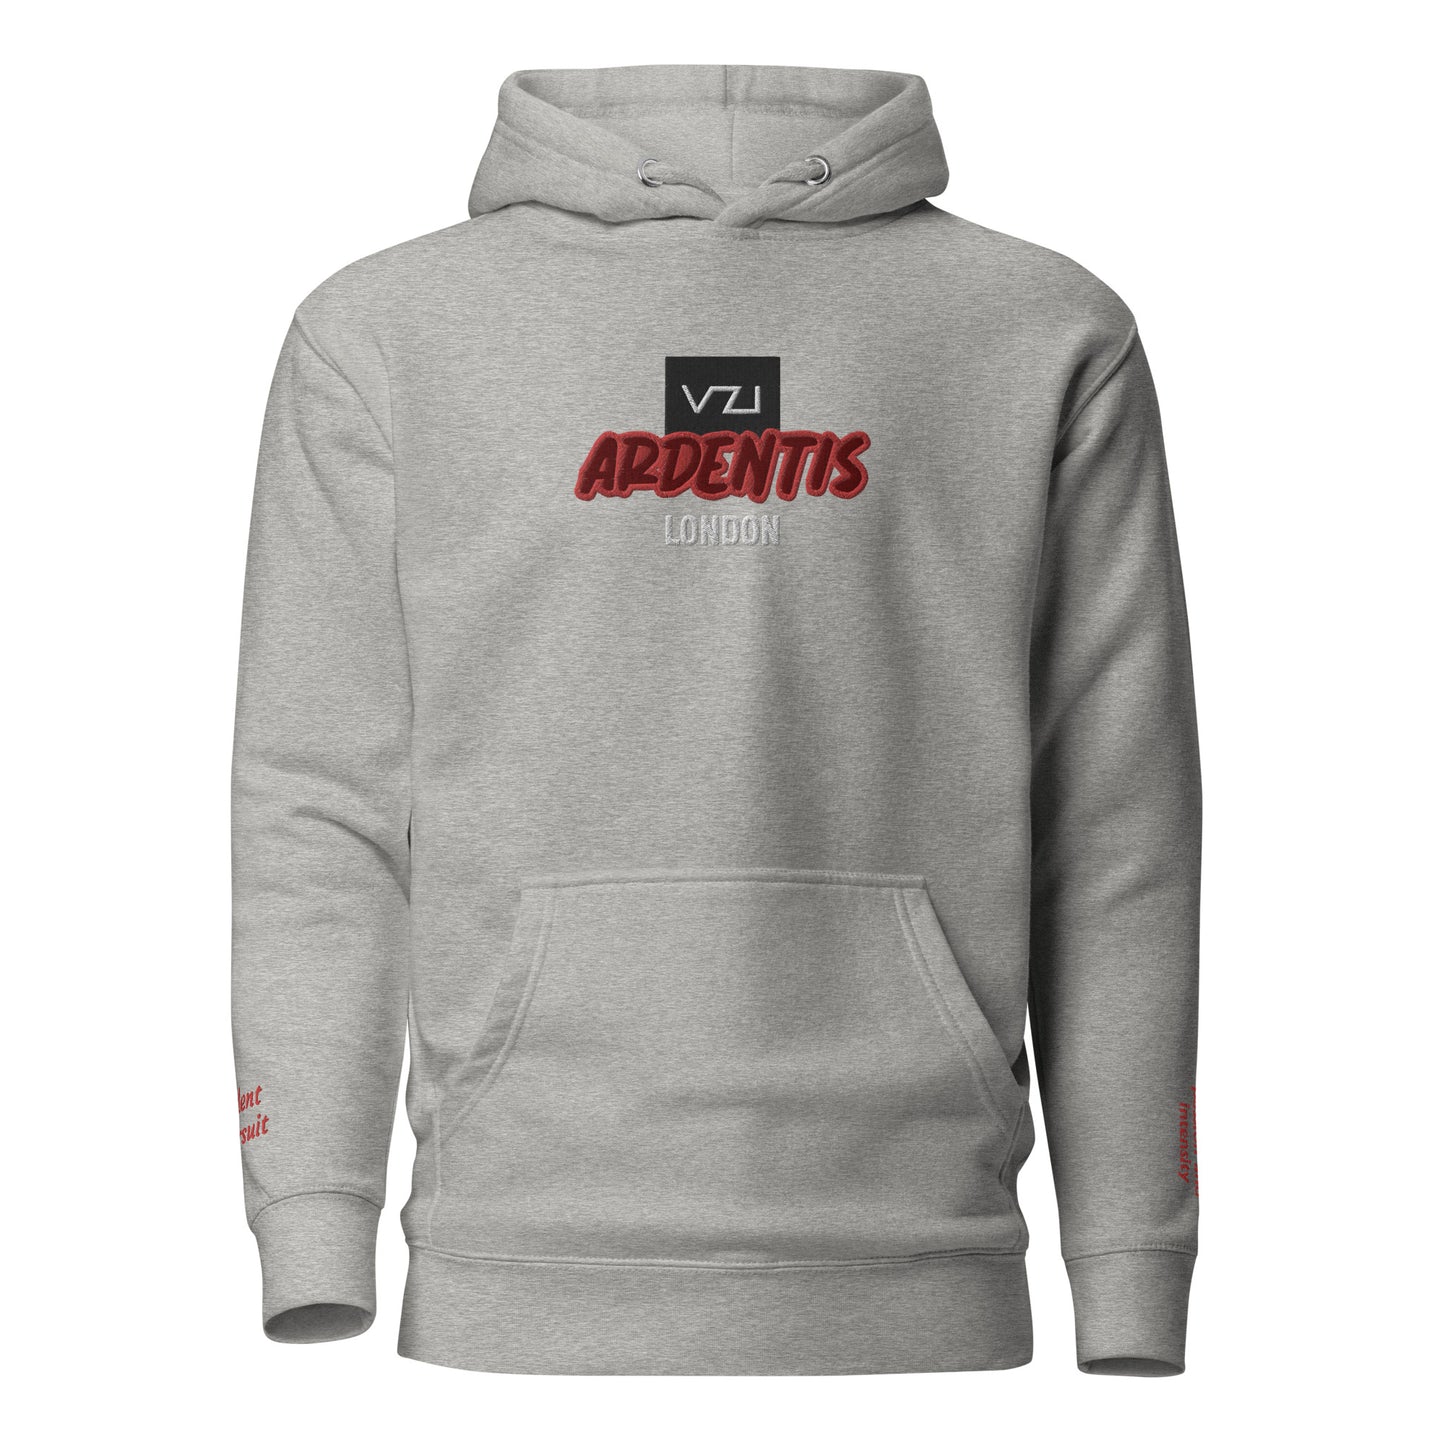 Ardentis: Unisex Hoodie, Classic Cotton: Focus on passion and intensity(Ardent Pursuit)